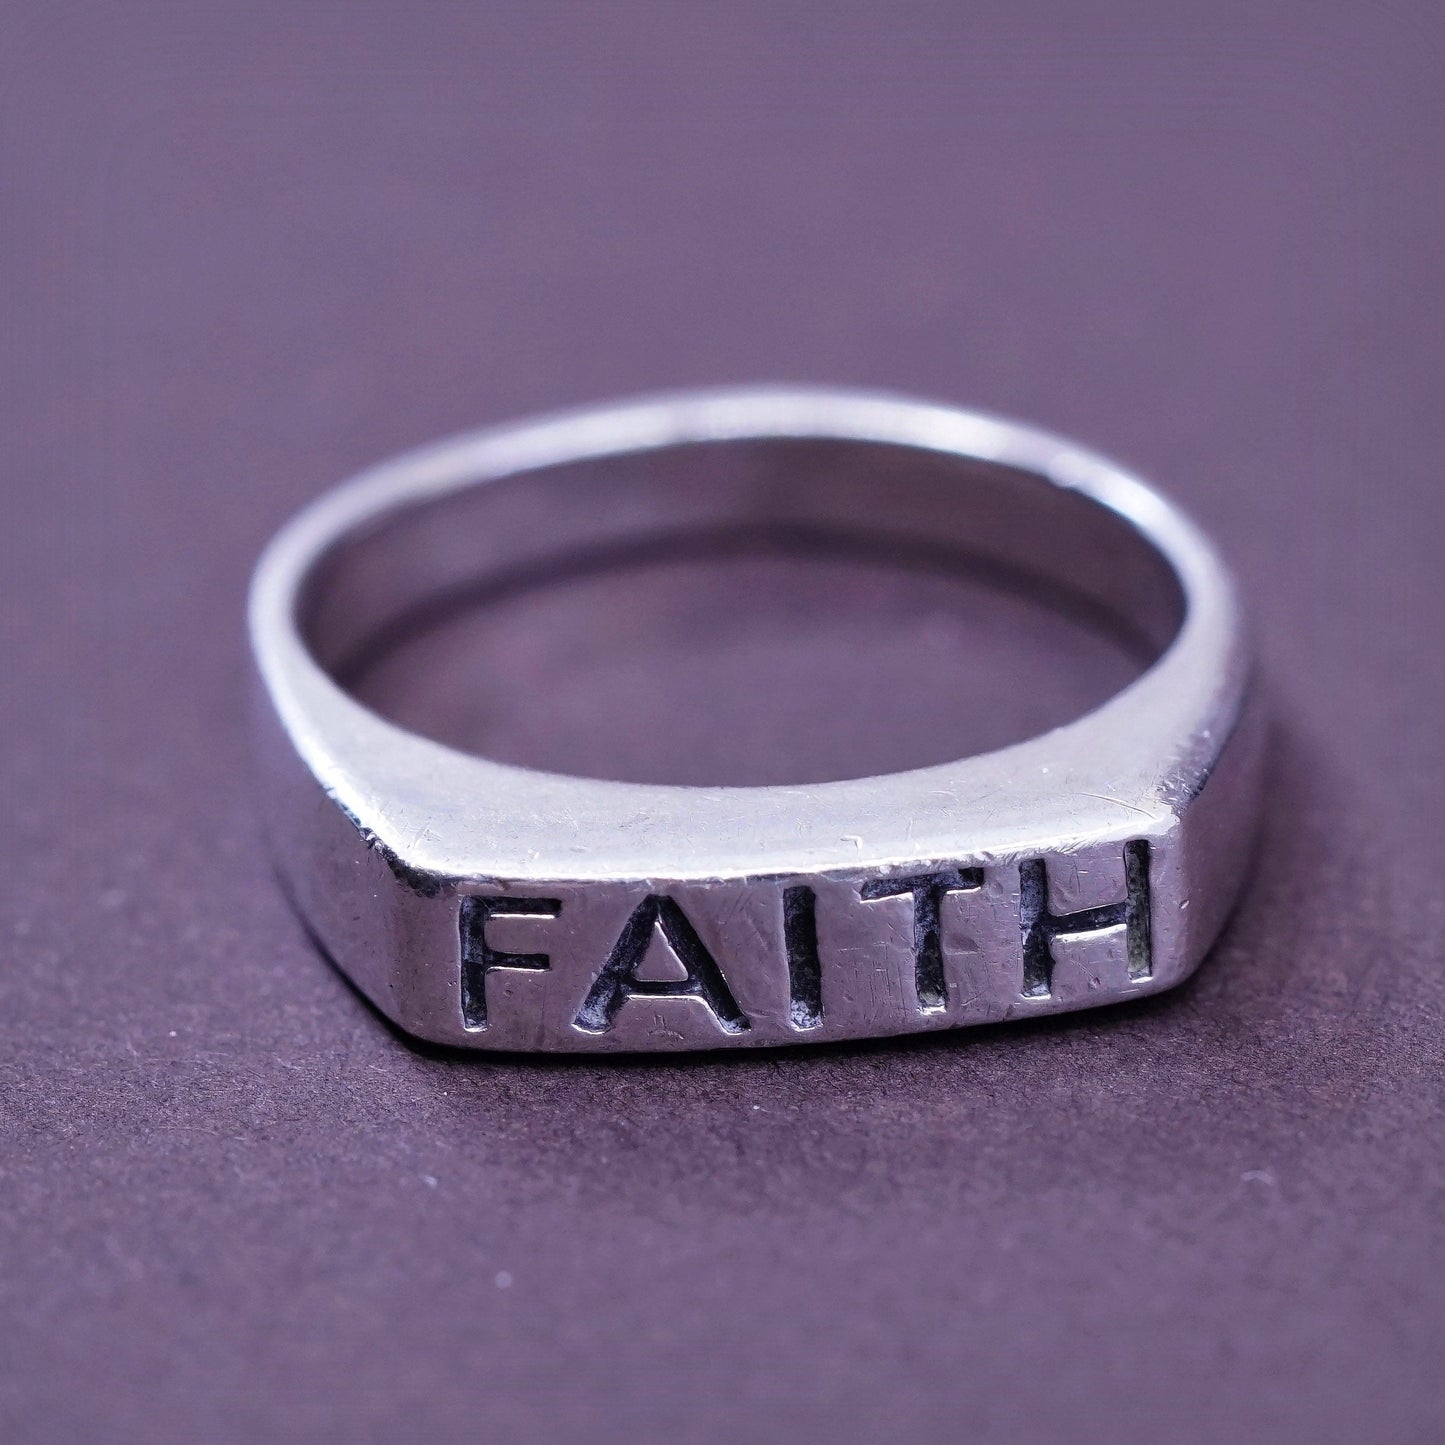 sz 6, vintage Sterling silver prayer ring, 925 stackable band engraved “faith”